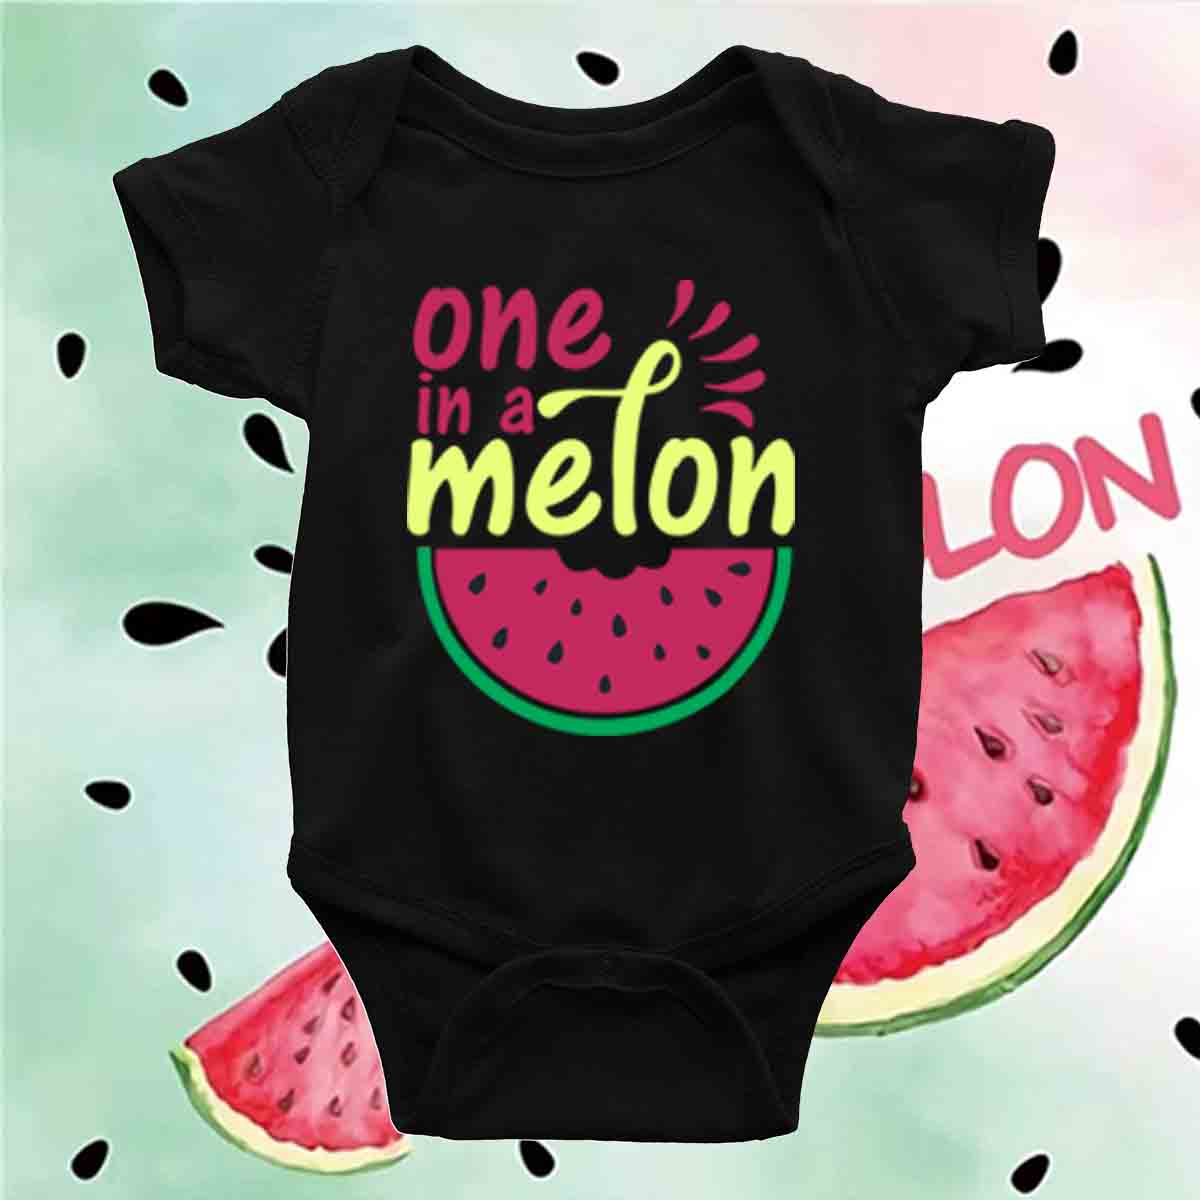 one in a melon black